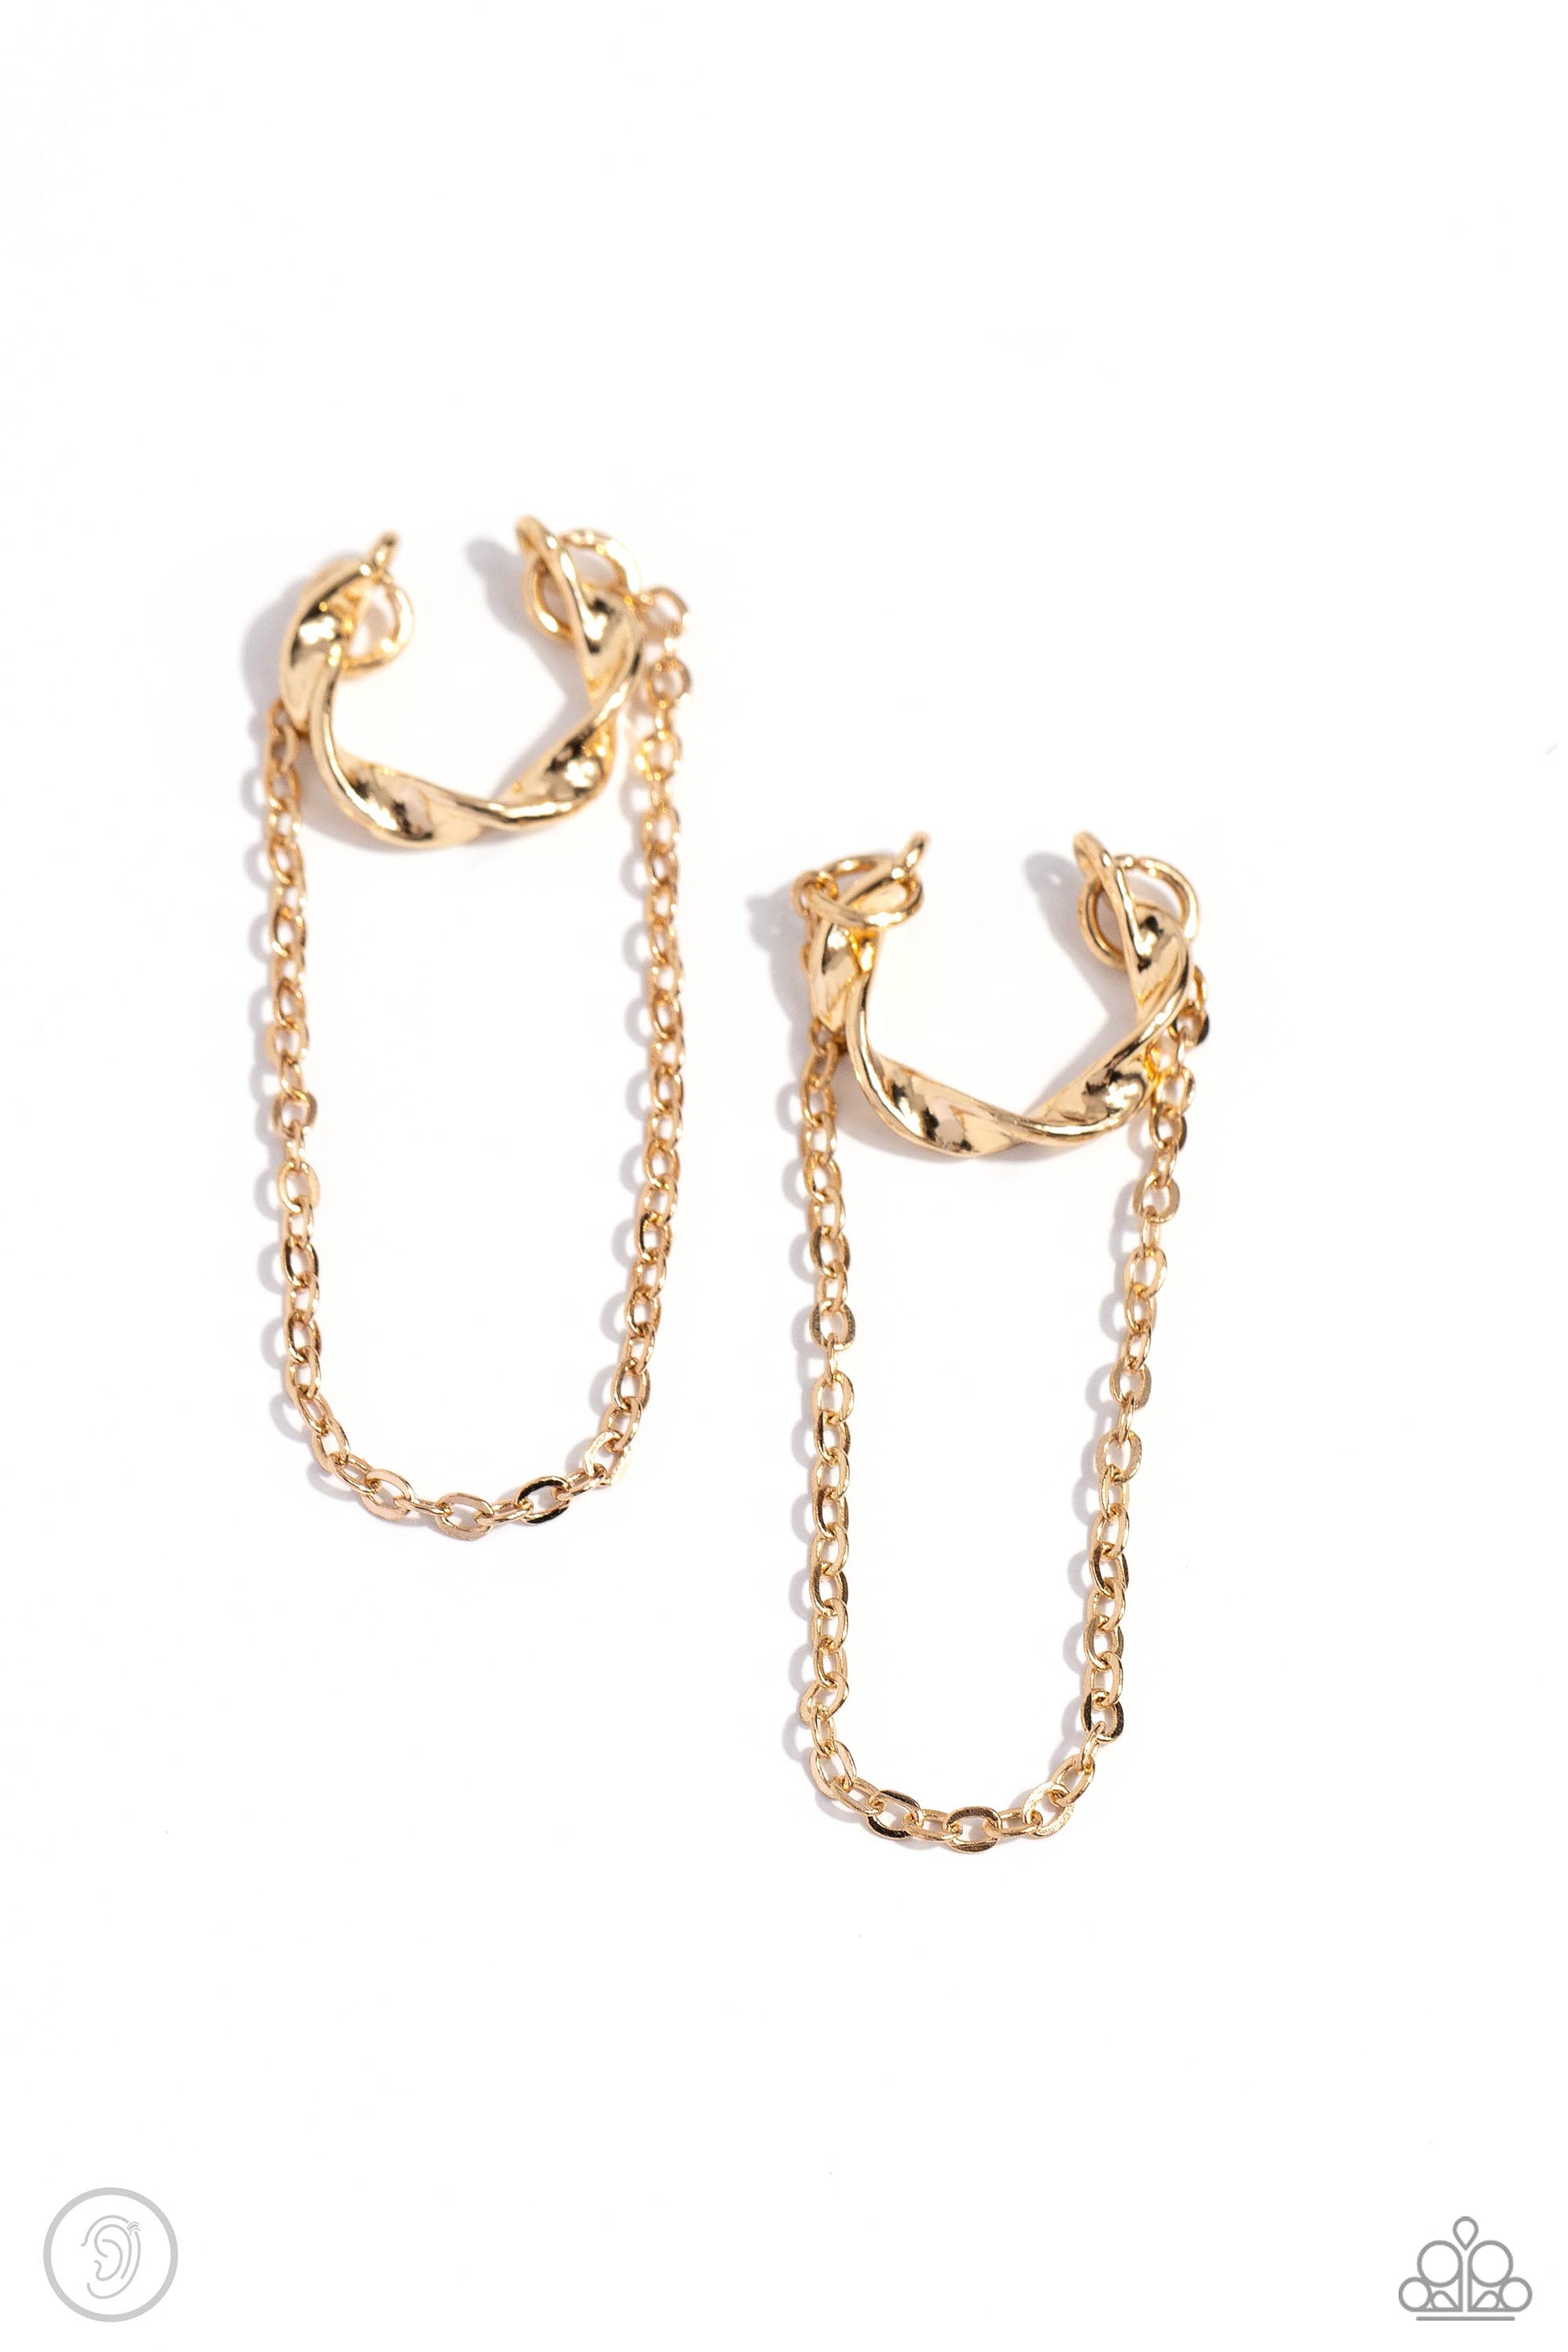 CUFF Hanger Gold Ear Cuff Earring - Paparazzi Accessories  A glistening gold bar delicately twists into a dainty hoop while a solitaire shimmery gold chain cascades below it, creating an adjustable refined, one-size-fits-all display.  Sold as one pair of cuff earrings.  Sku:  P5PO-CFGD-264XX